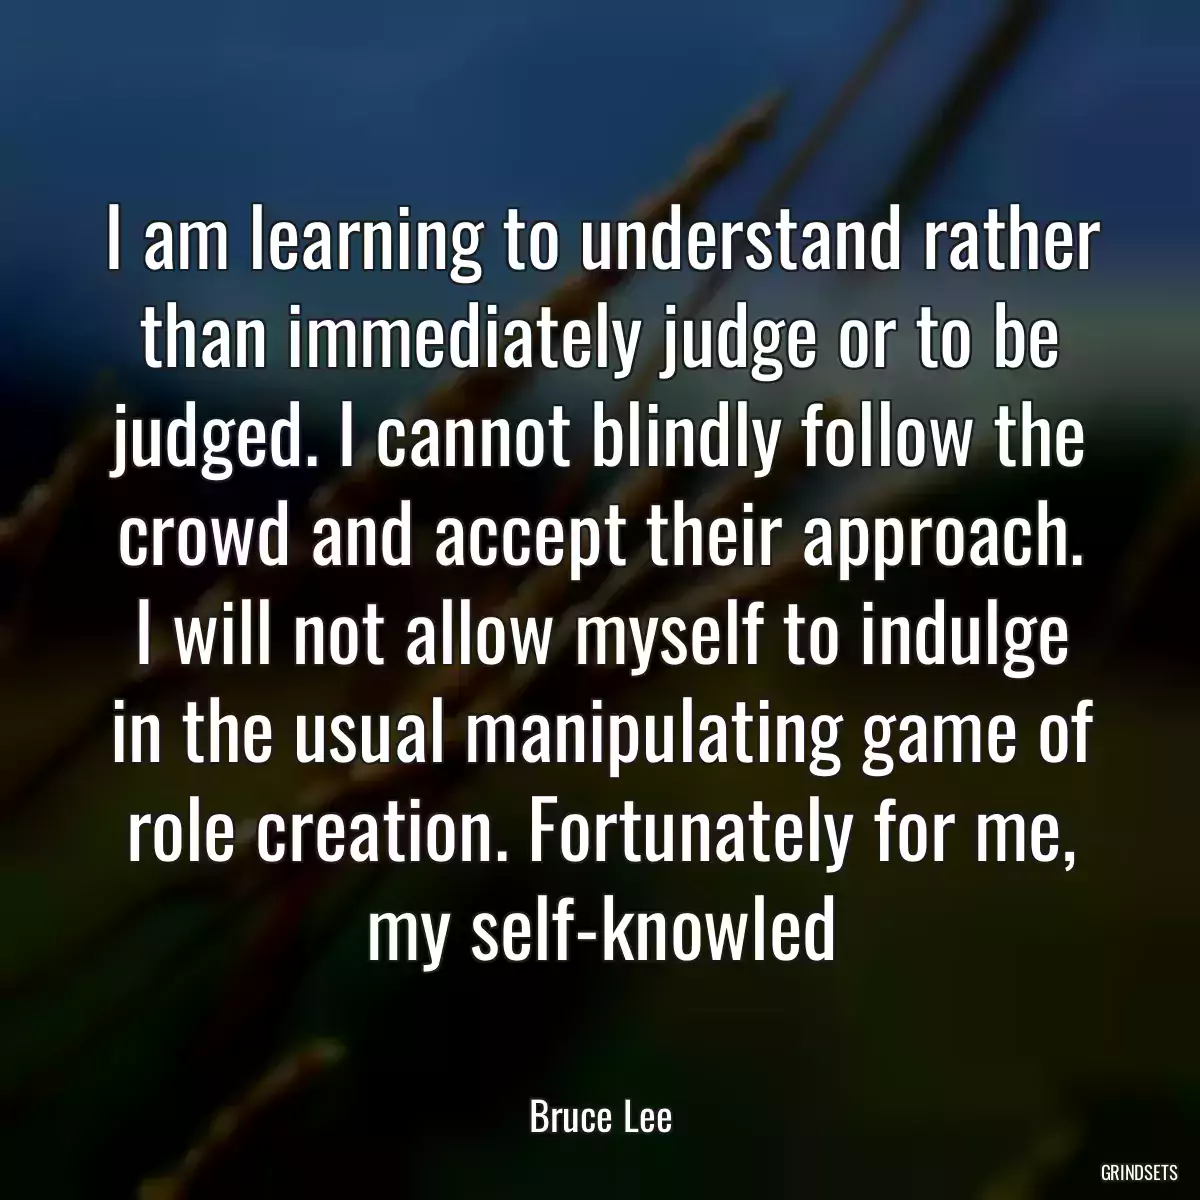 I am learning to understand rather than immediately judge or to be judged. I cannot blindly follow the crowd and accept their approach. I will not allow myself to indulge in the usual manipulating game of role creation. Fortunately for me, my self-knowled